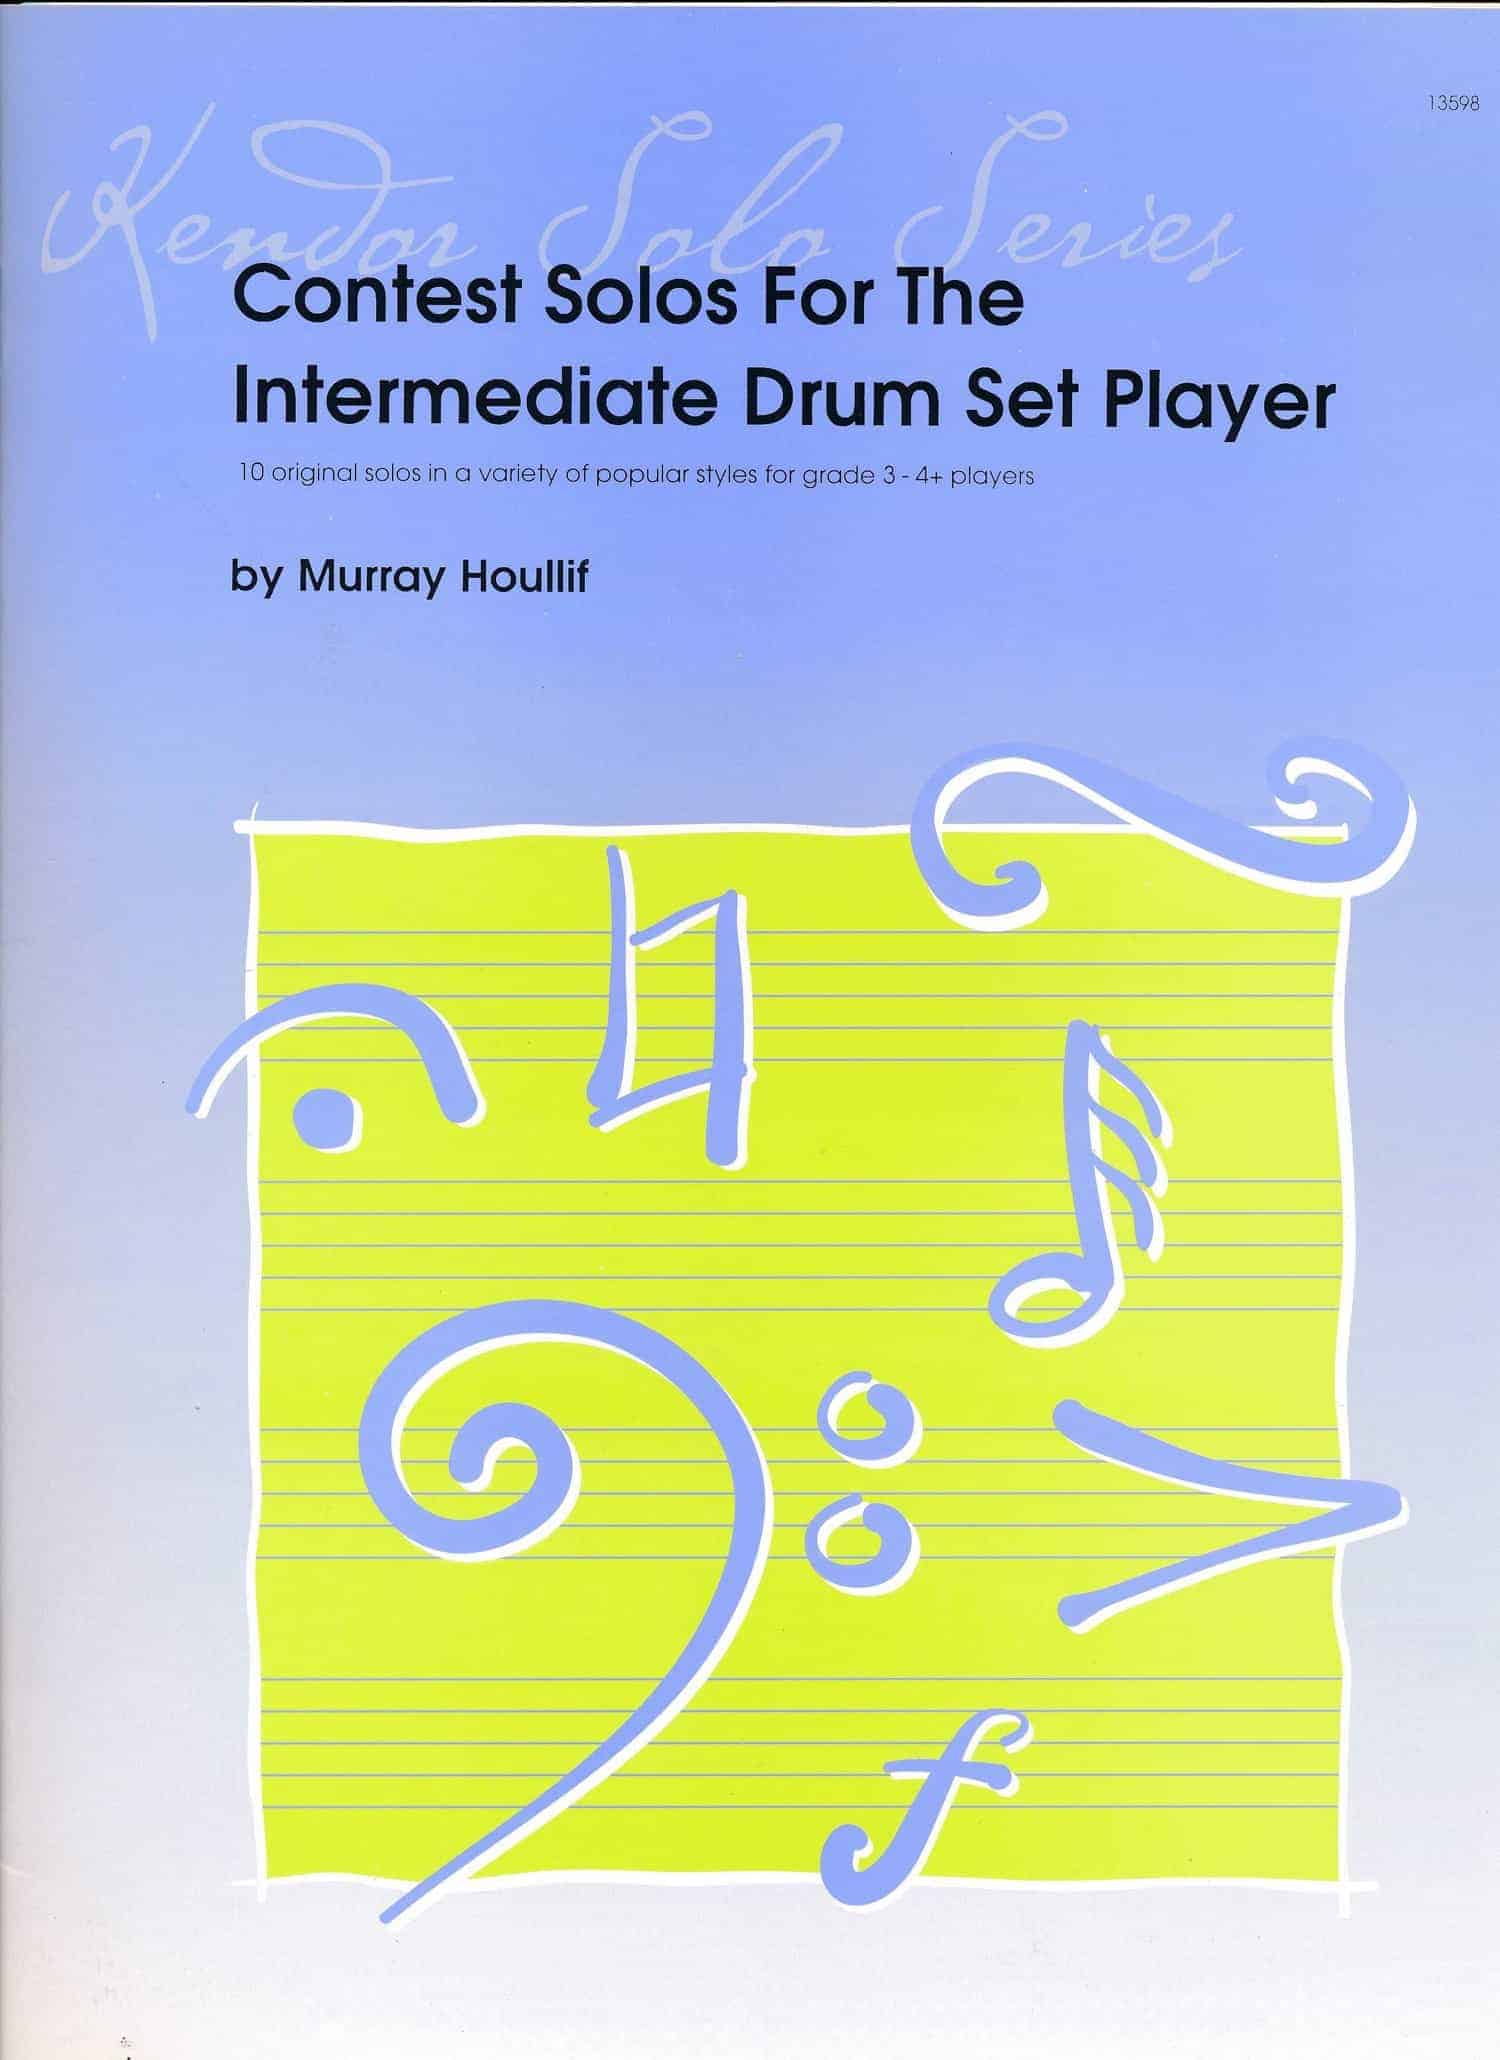 Contest Solos For The Intermediate Drum Set Player